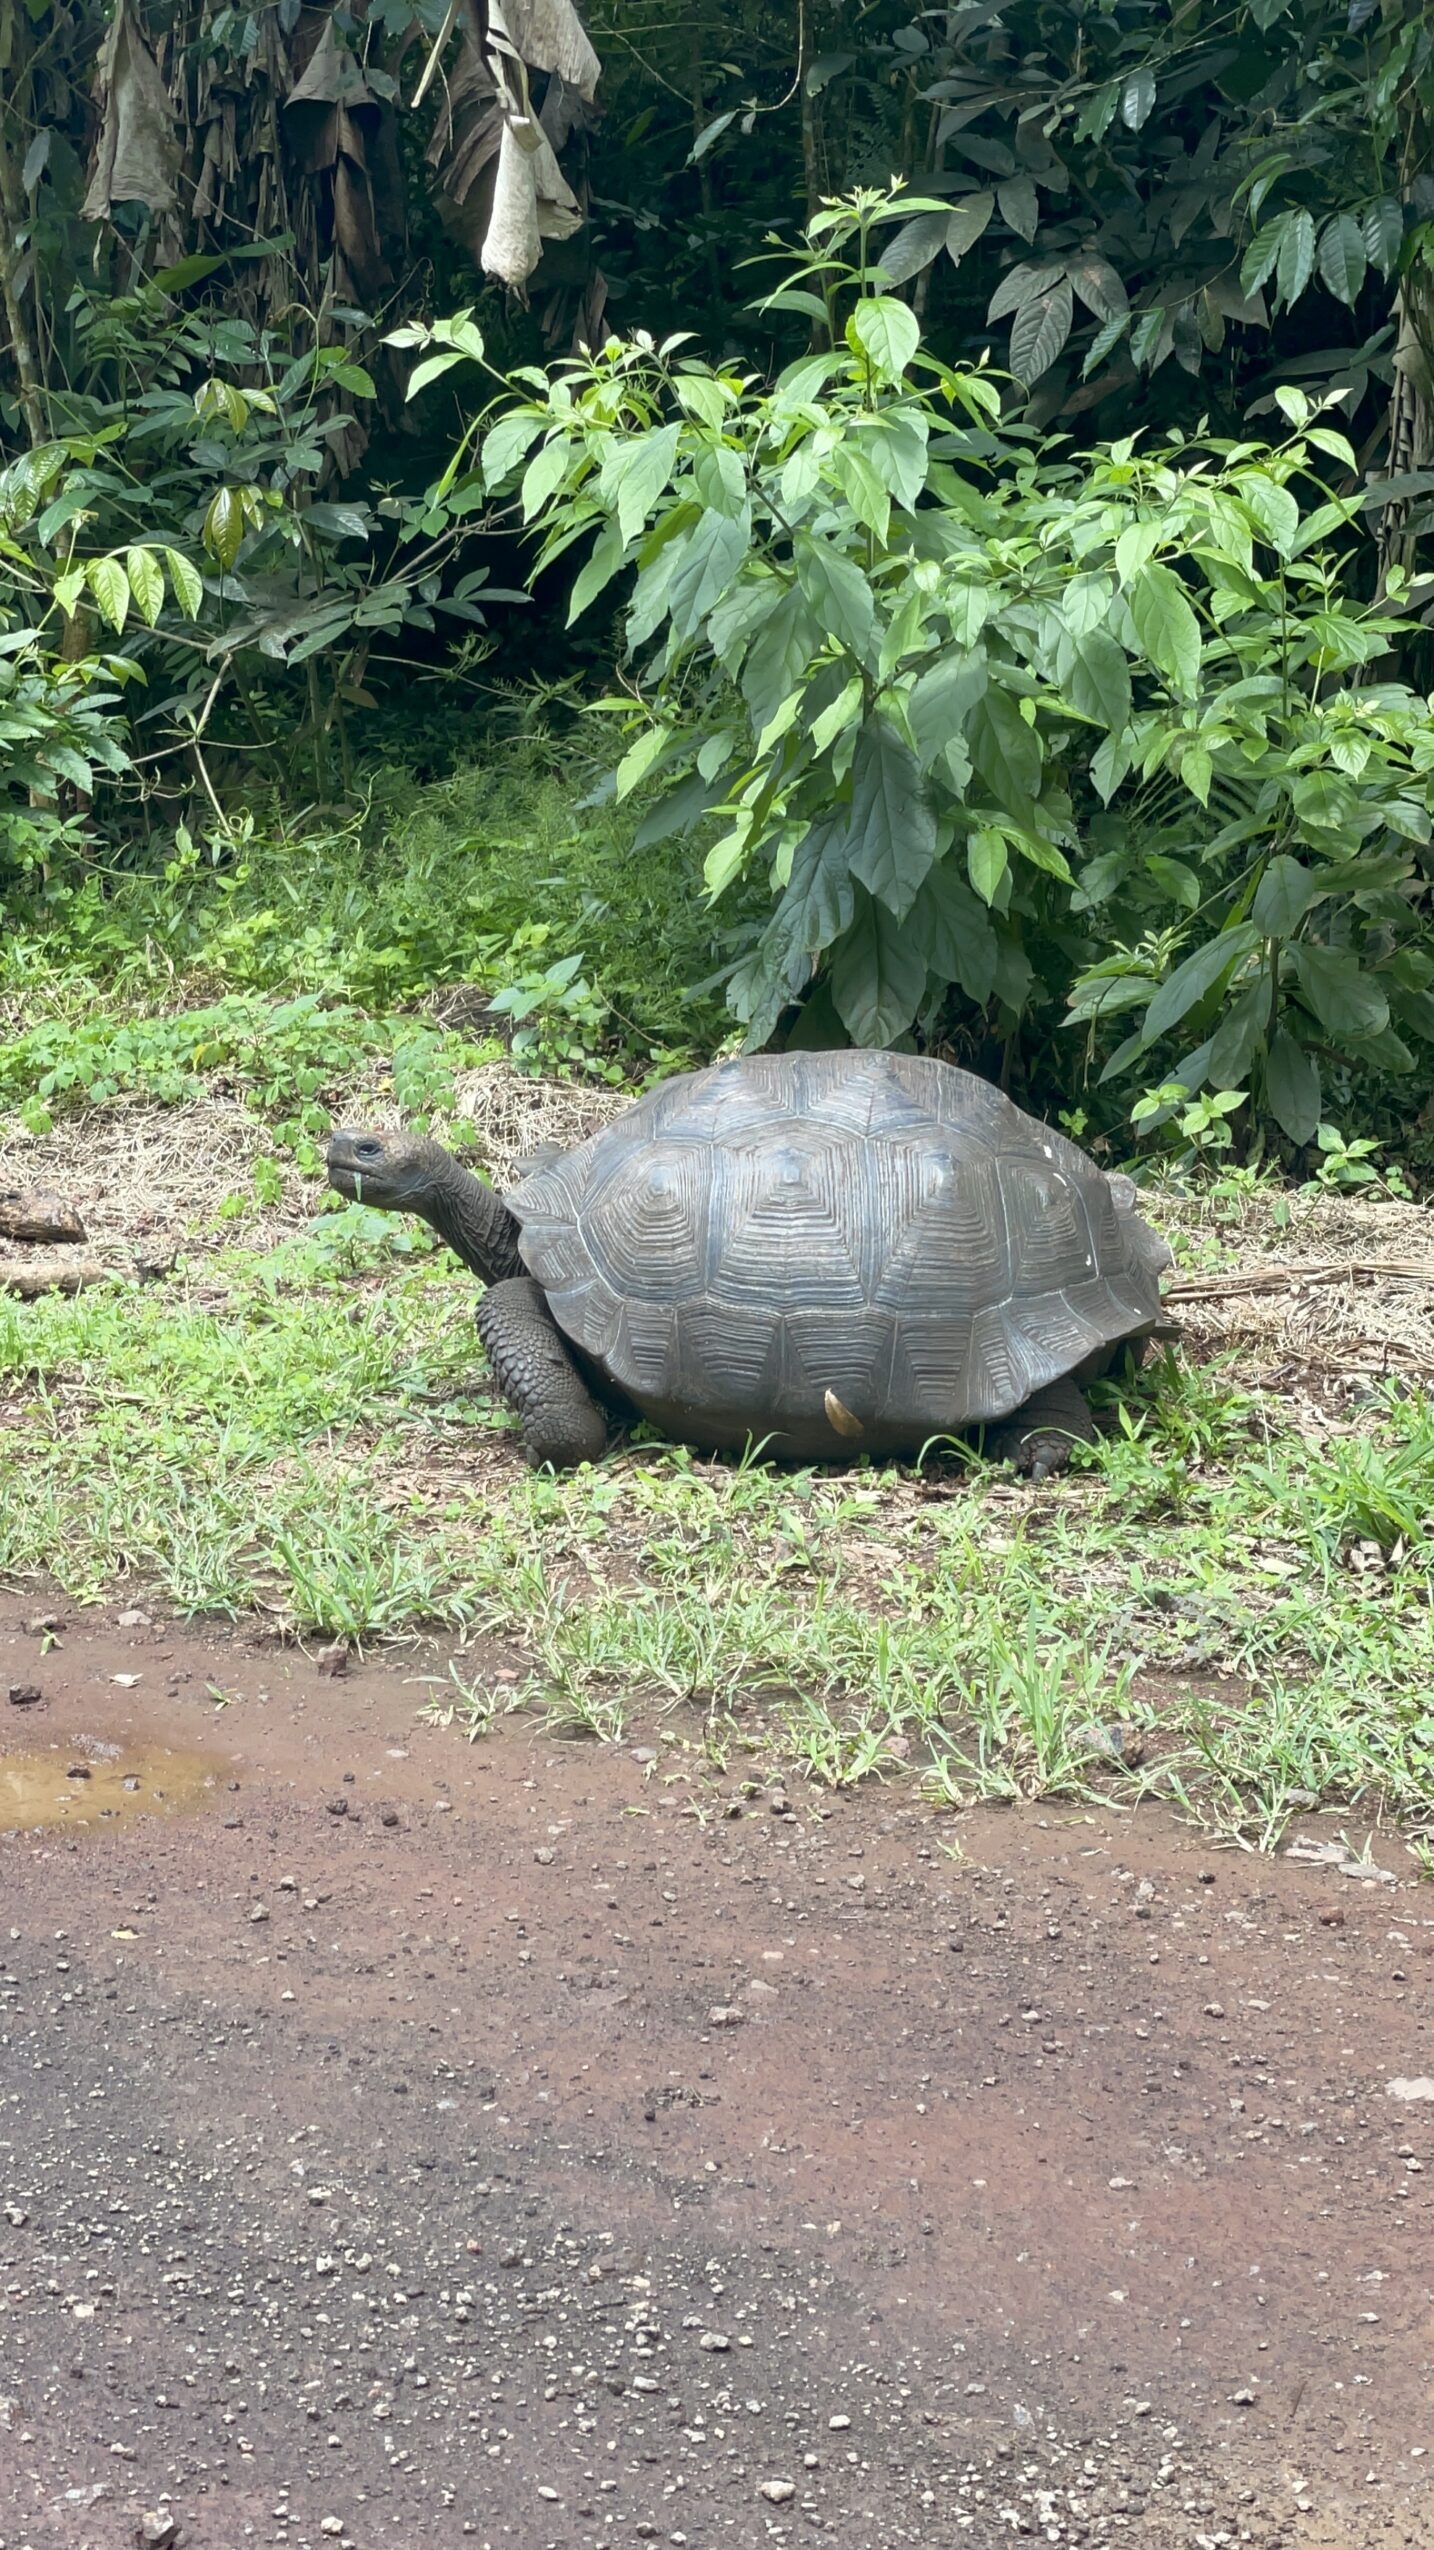 How to See the Huge Tortoises on the Galápagos Islands